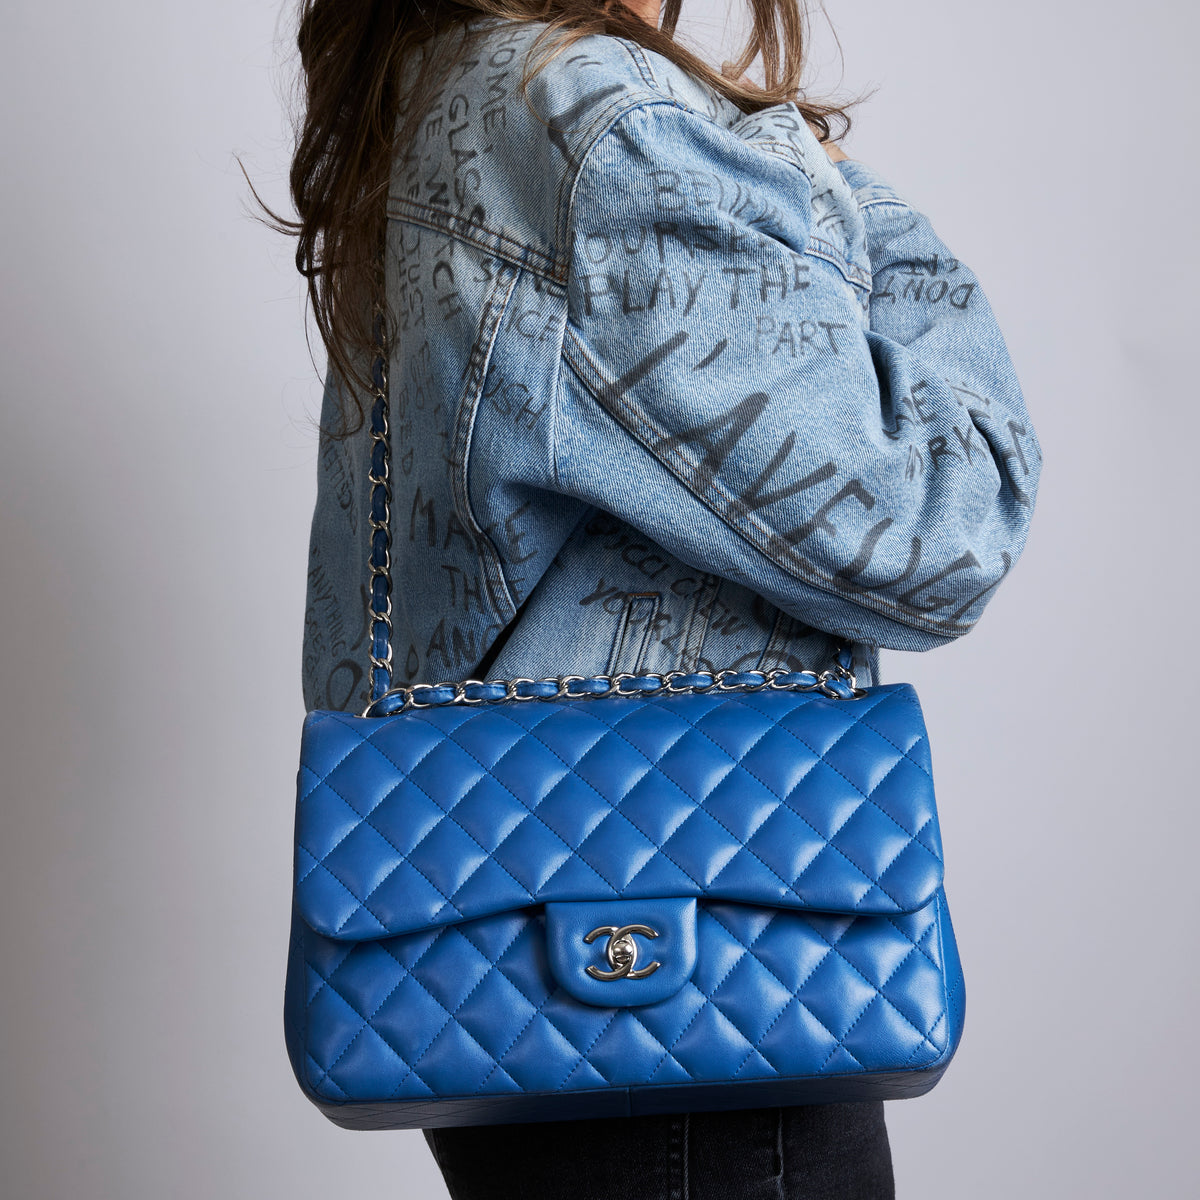 Pre-Loved Bright Blue Lambskin Large Double Flap Bag with Silver Hardware (on body)